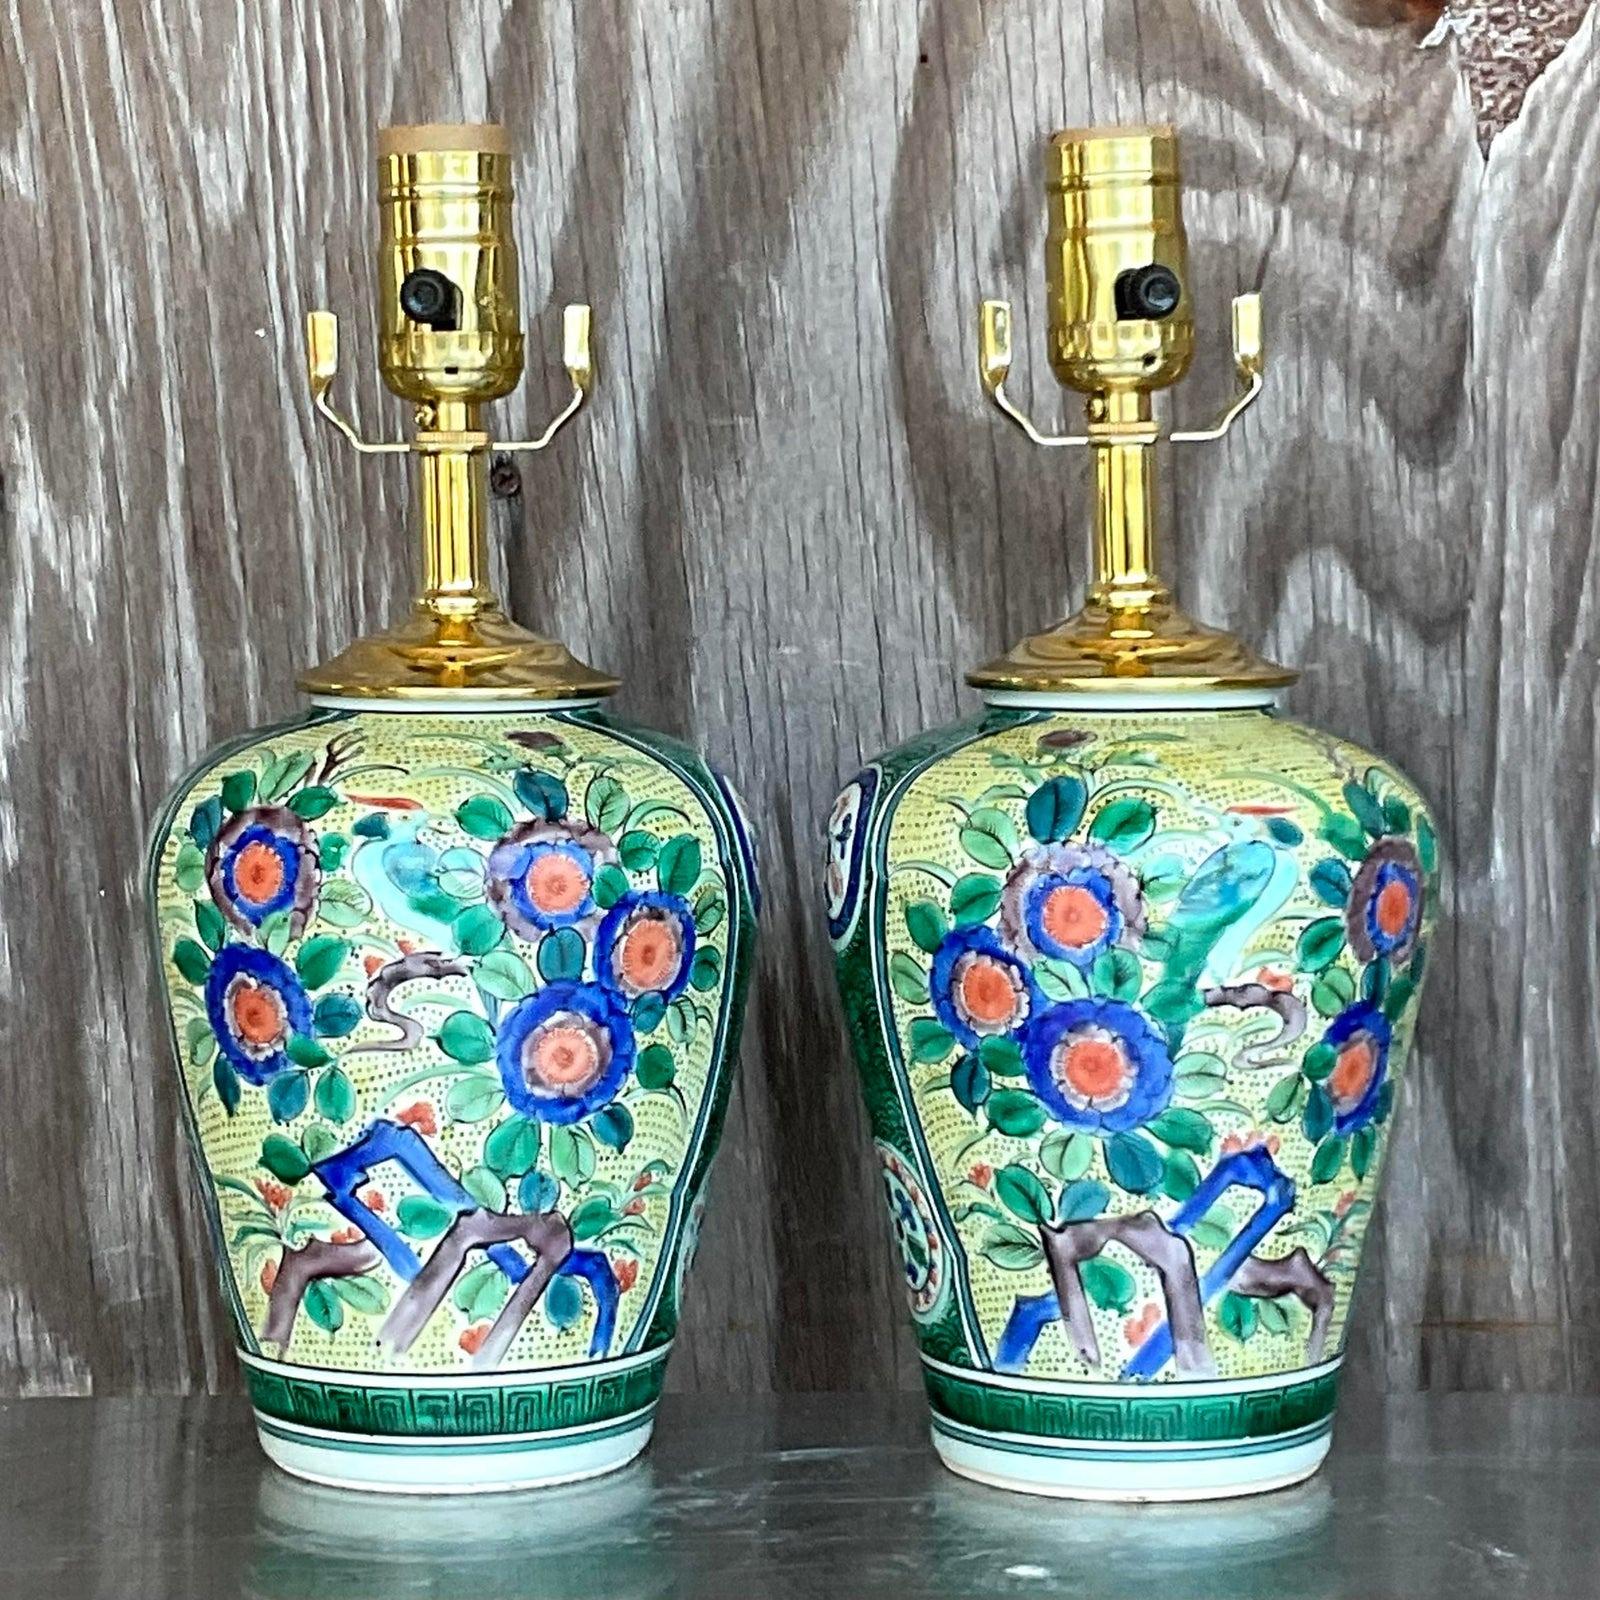 Vintage Asian Glazed Ceramic Floral Table Lamps - a Pair For Sale 5